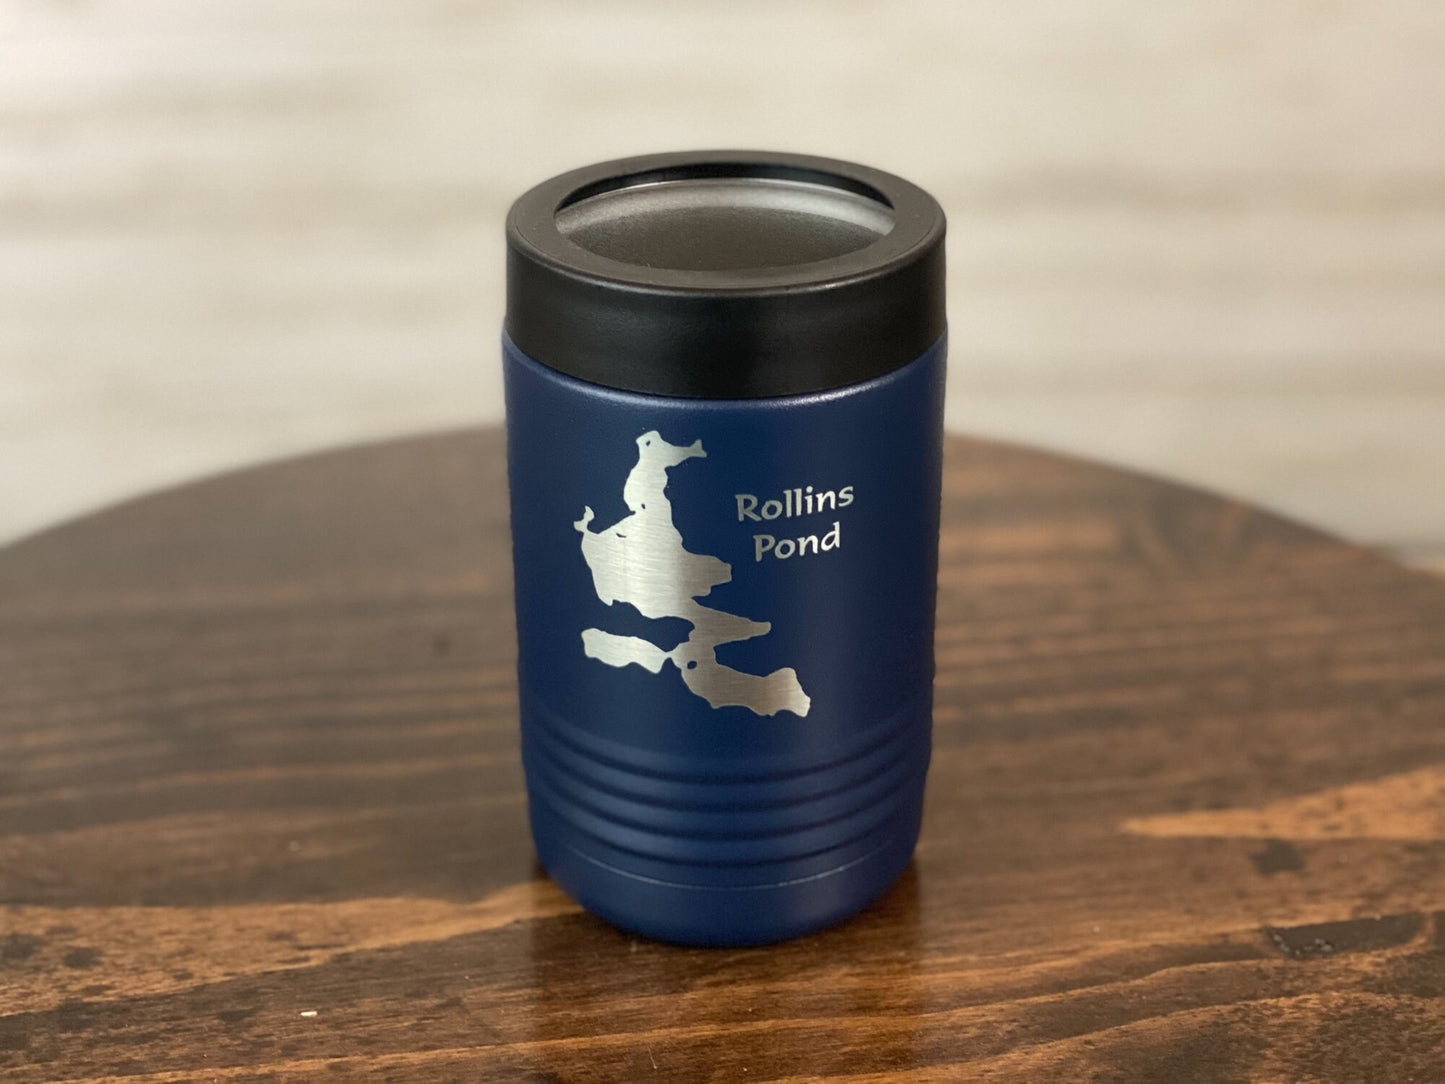 Rollins Pond - New York - Insulated 12 oz can and bottle holder